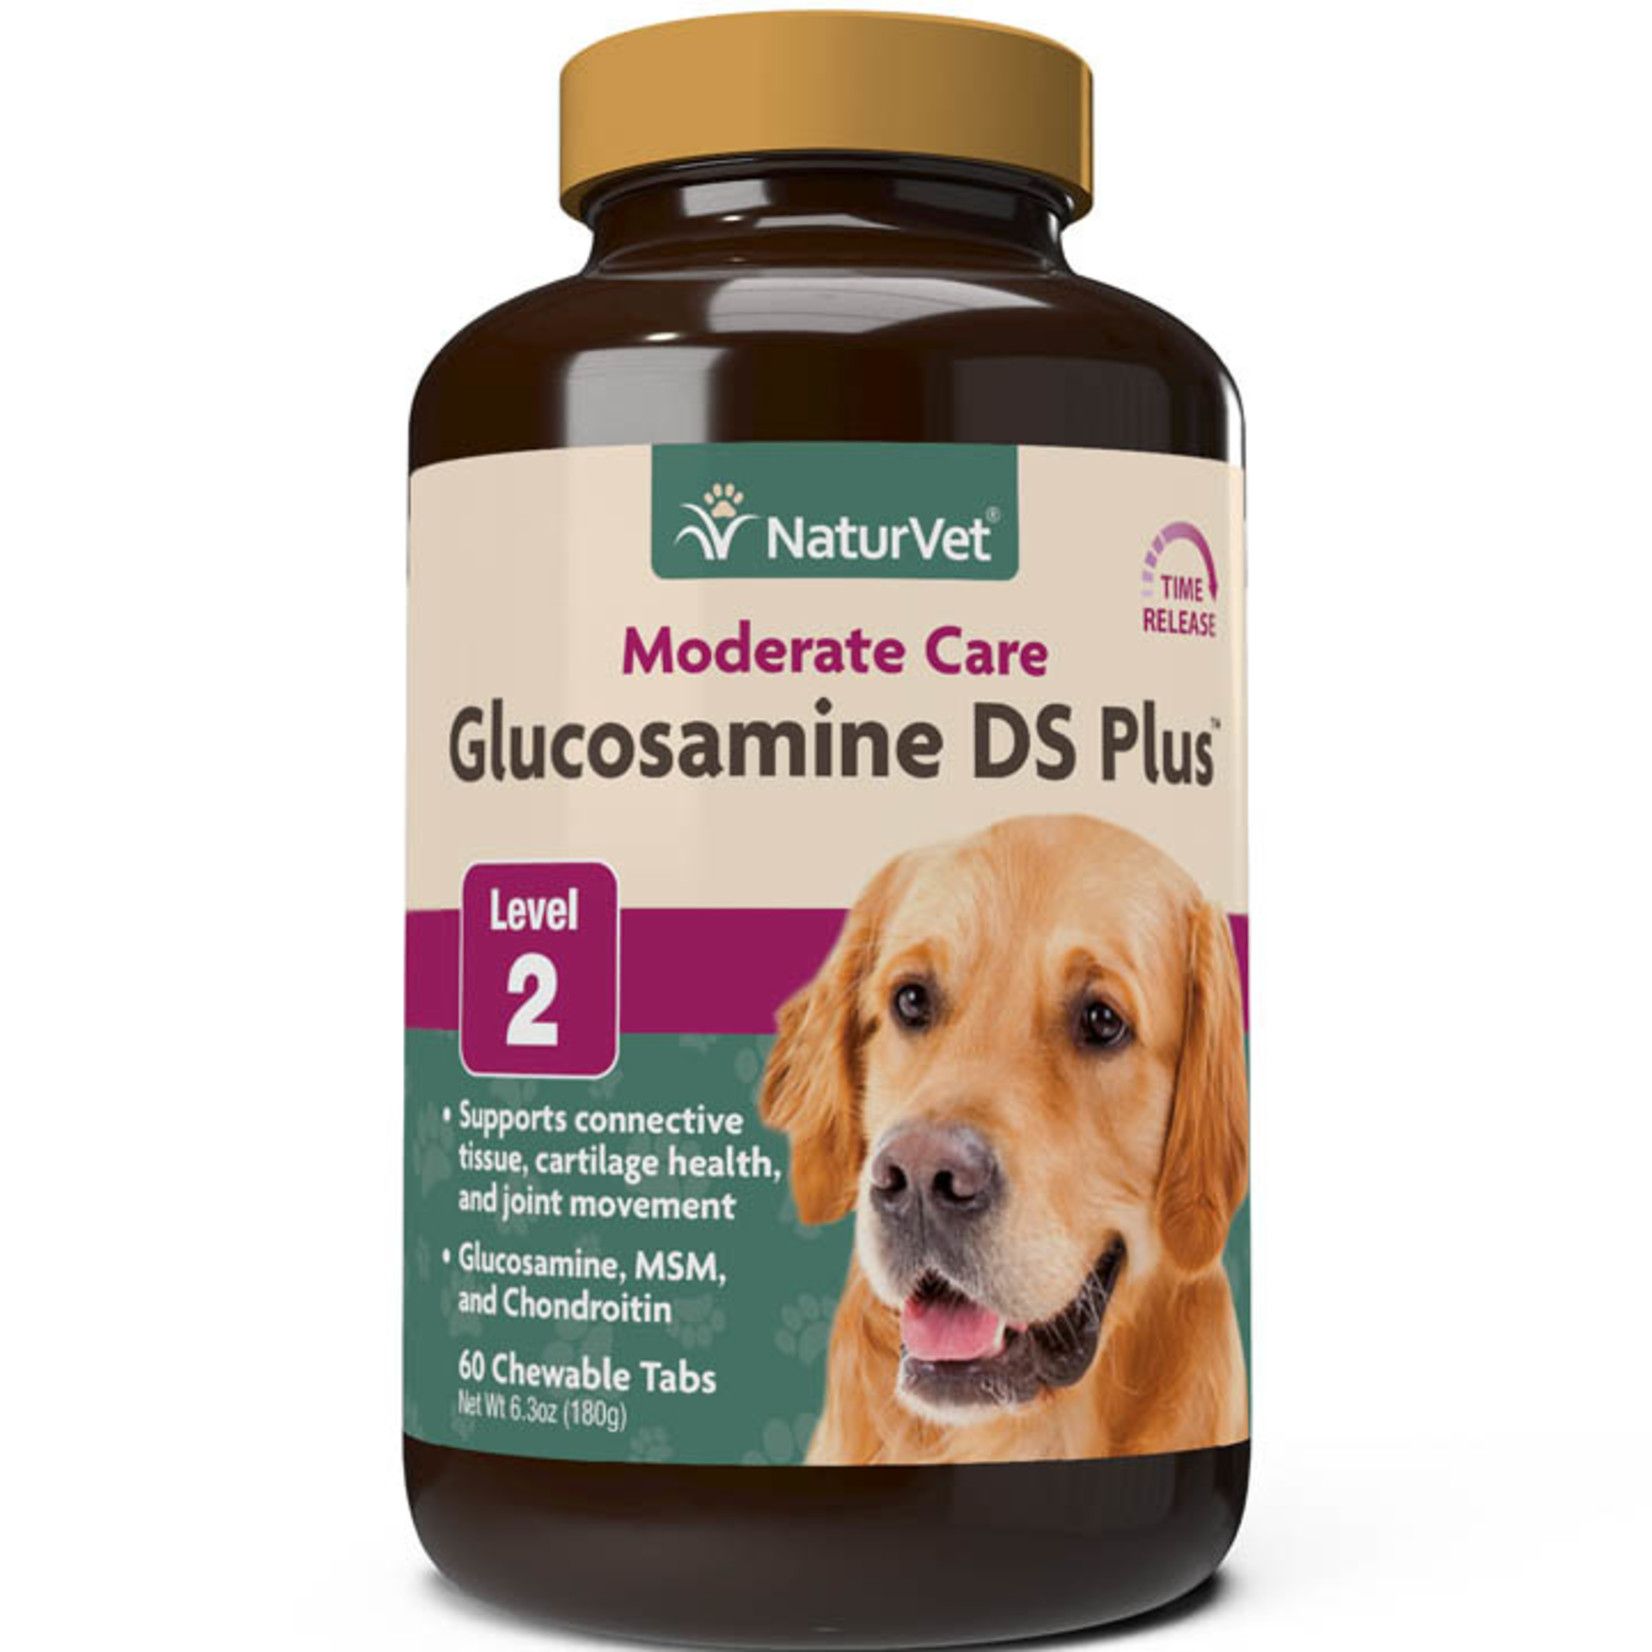 naturVet NaturVet Glucosamine DS+ Moderate Care Level 2 Joint Health Chewable Tablets for Dogs and Cats - 60ct, 150ct